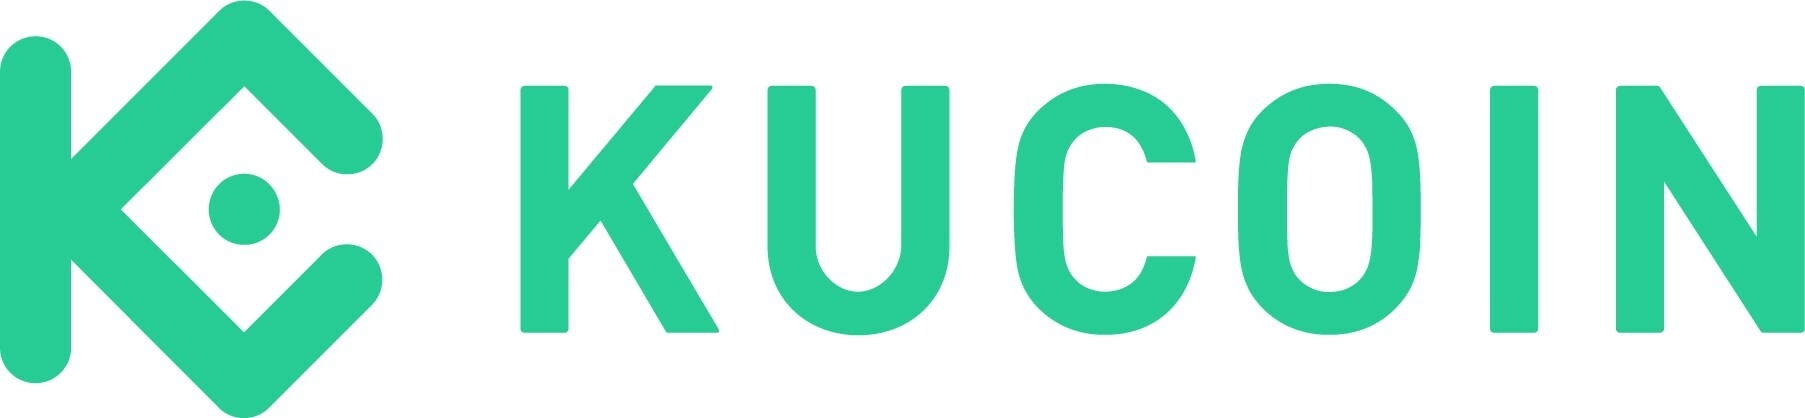 KuCoin Research Report: Parallel Trends - Crypto Market Entered Extreme Greed Zone and Surge in $4.55 Billion Rise in USDT & USDC Issuance